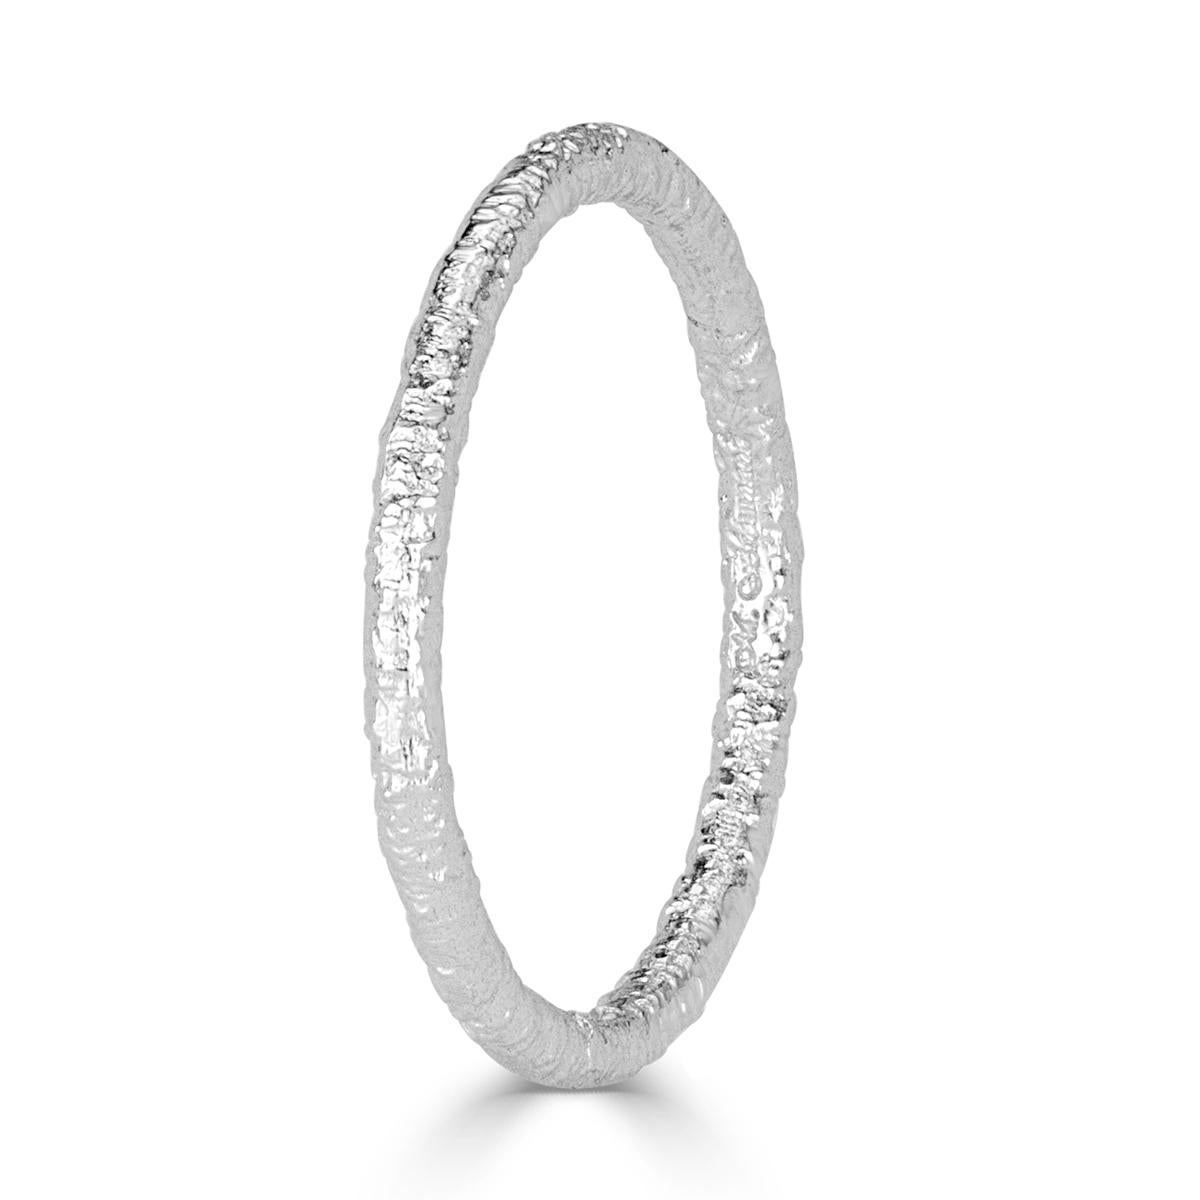 Custom created in platinum, this lovely band features a textured design which looks incredible in a stack or as a stand alone piece.
